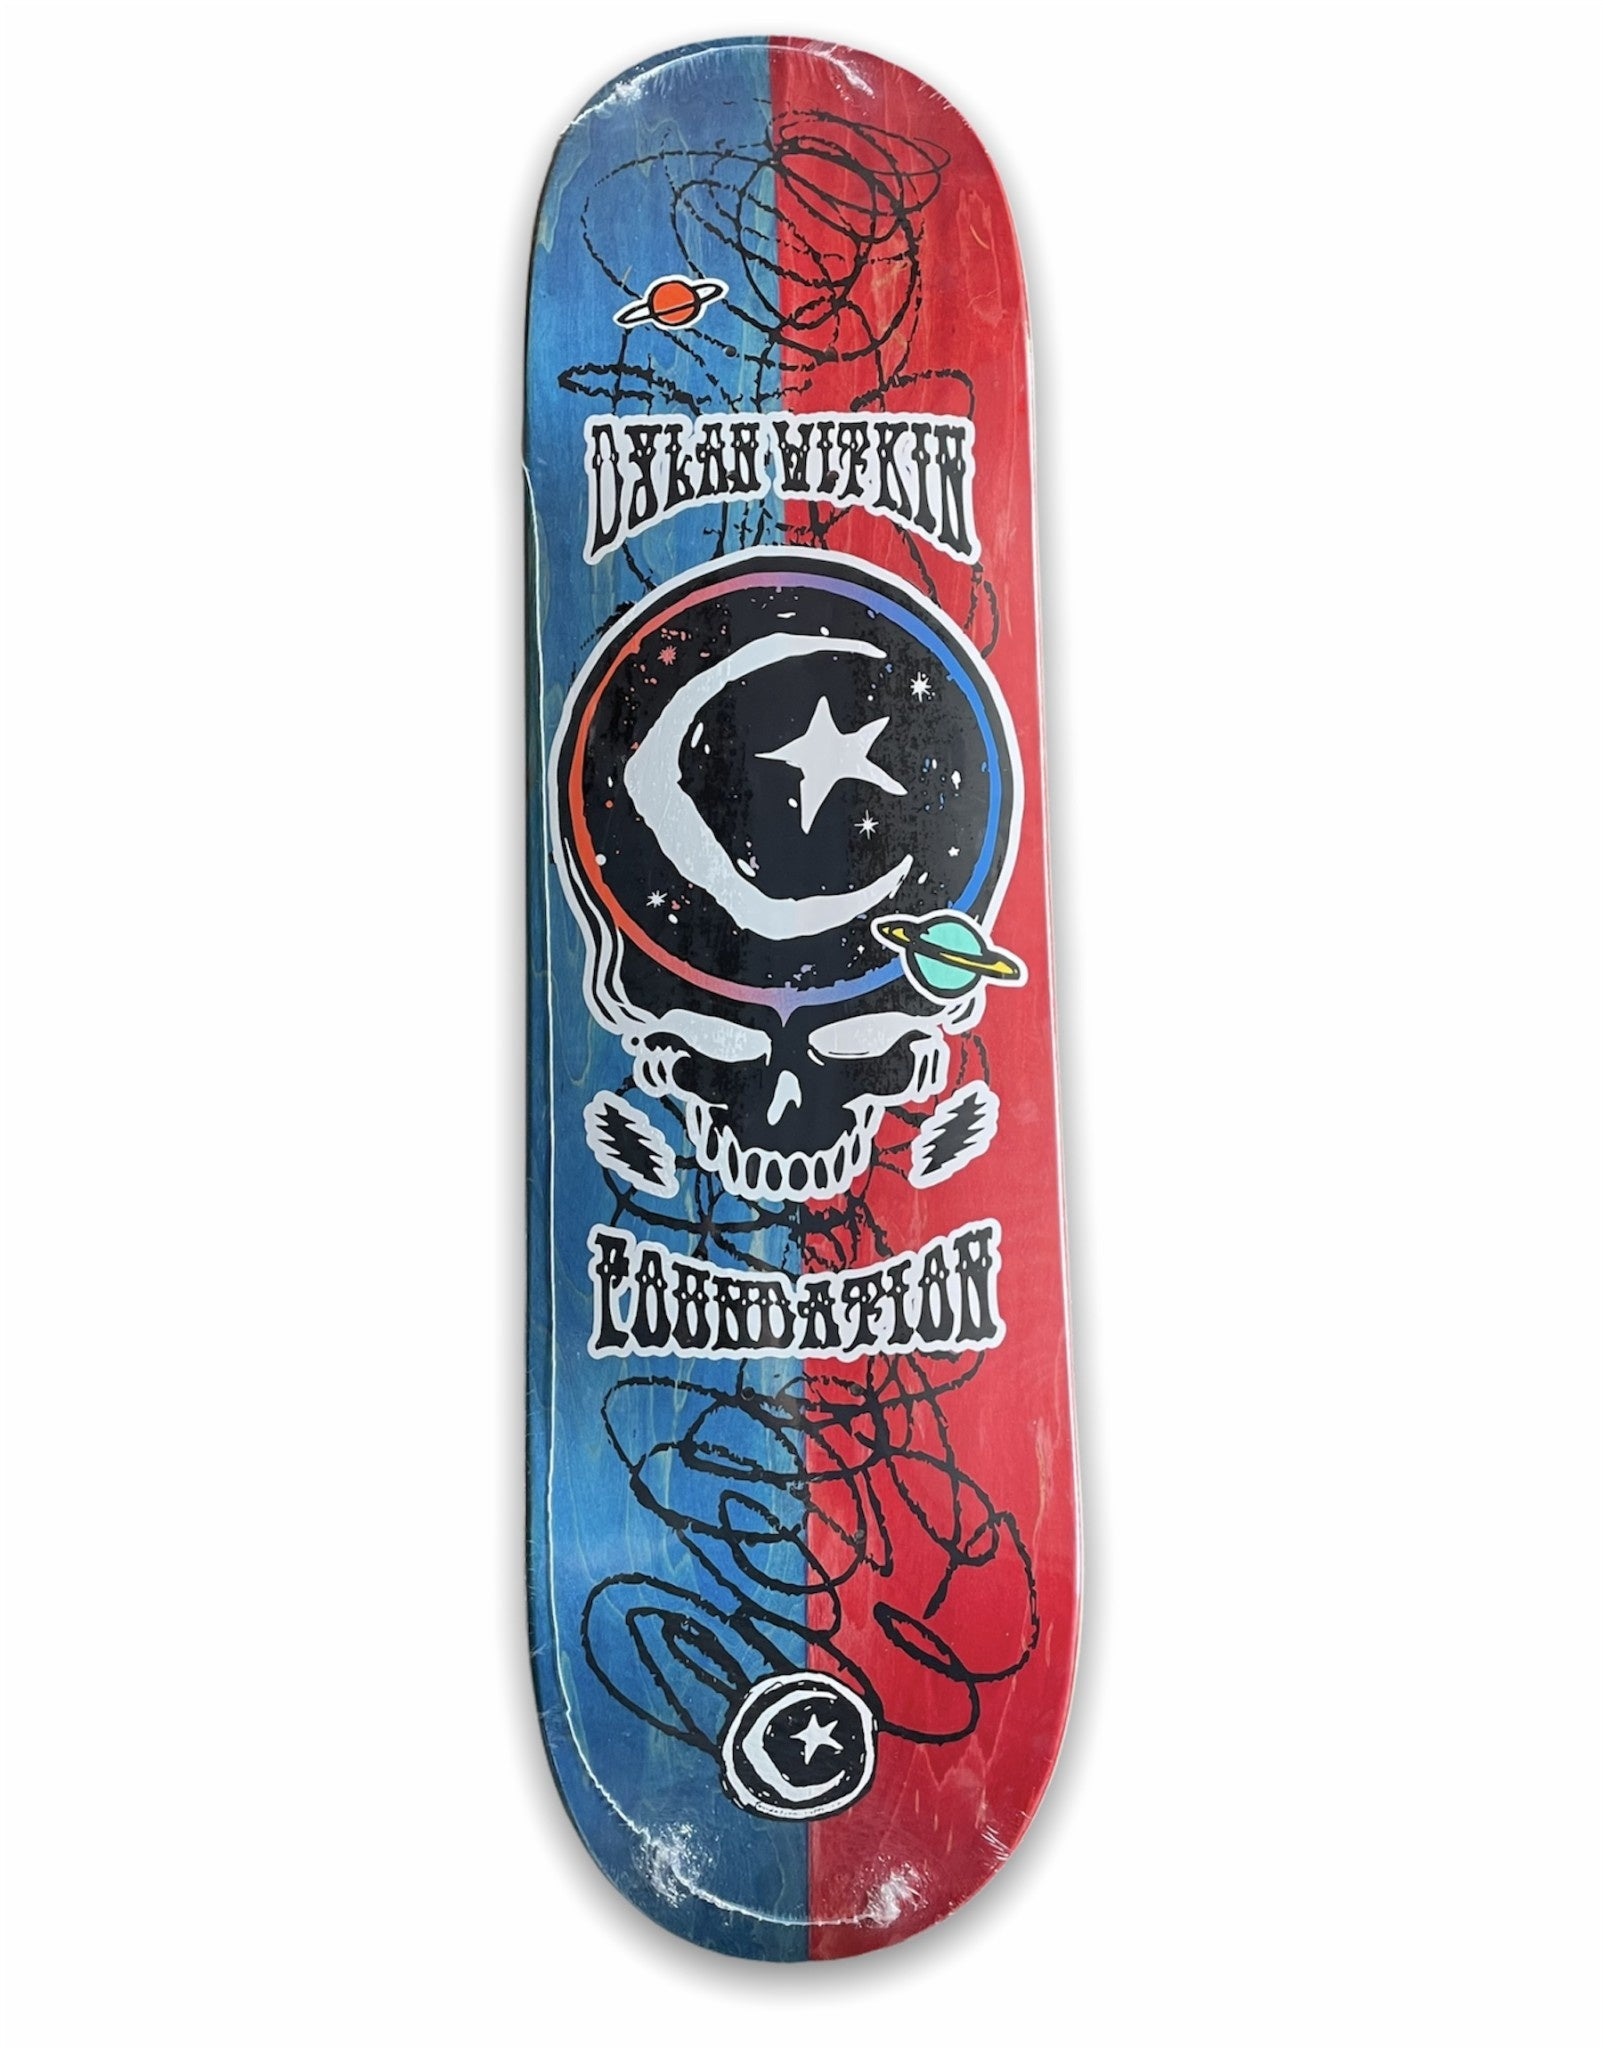 FOUNDATION DECK - WITKIN COSMIC VOYAGE (8.5")